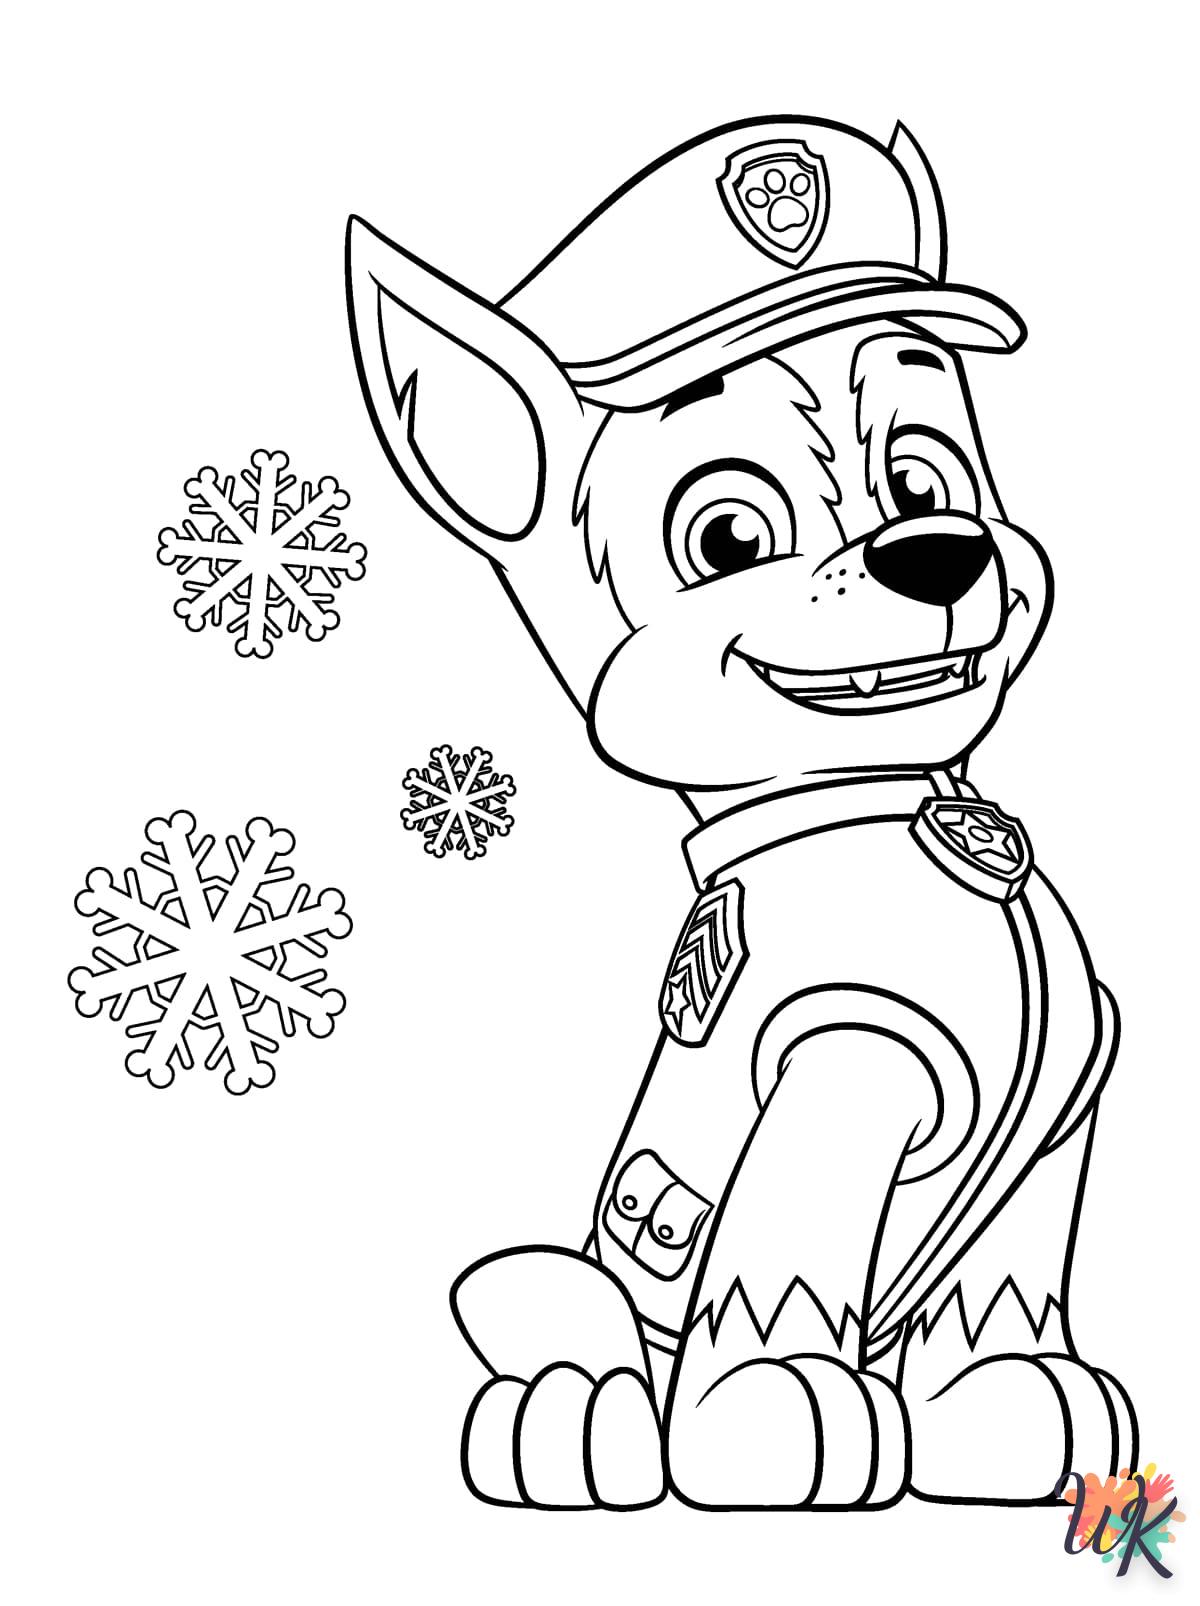 Paw Patrol coloring page to color free online